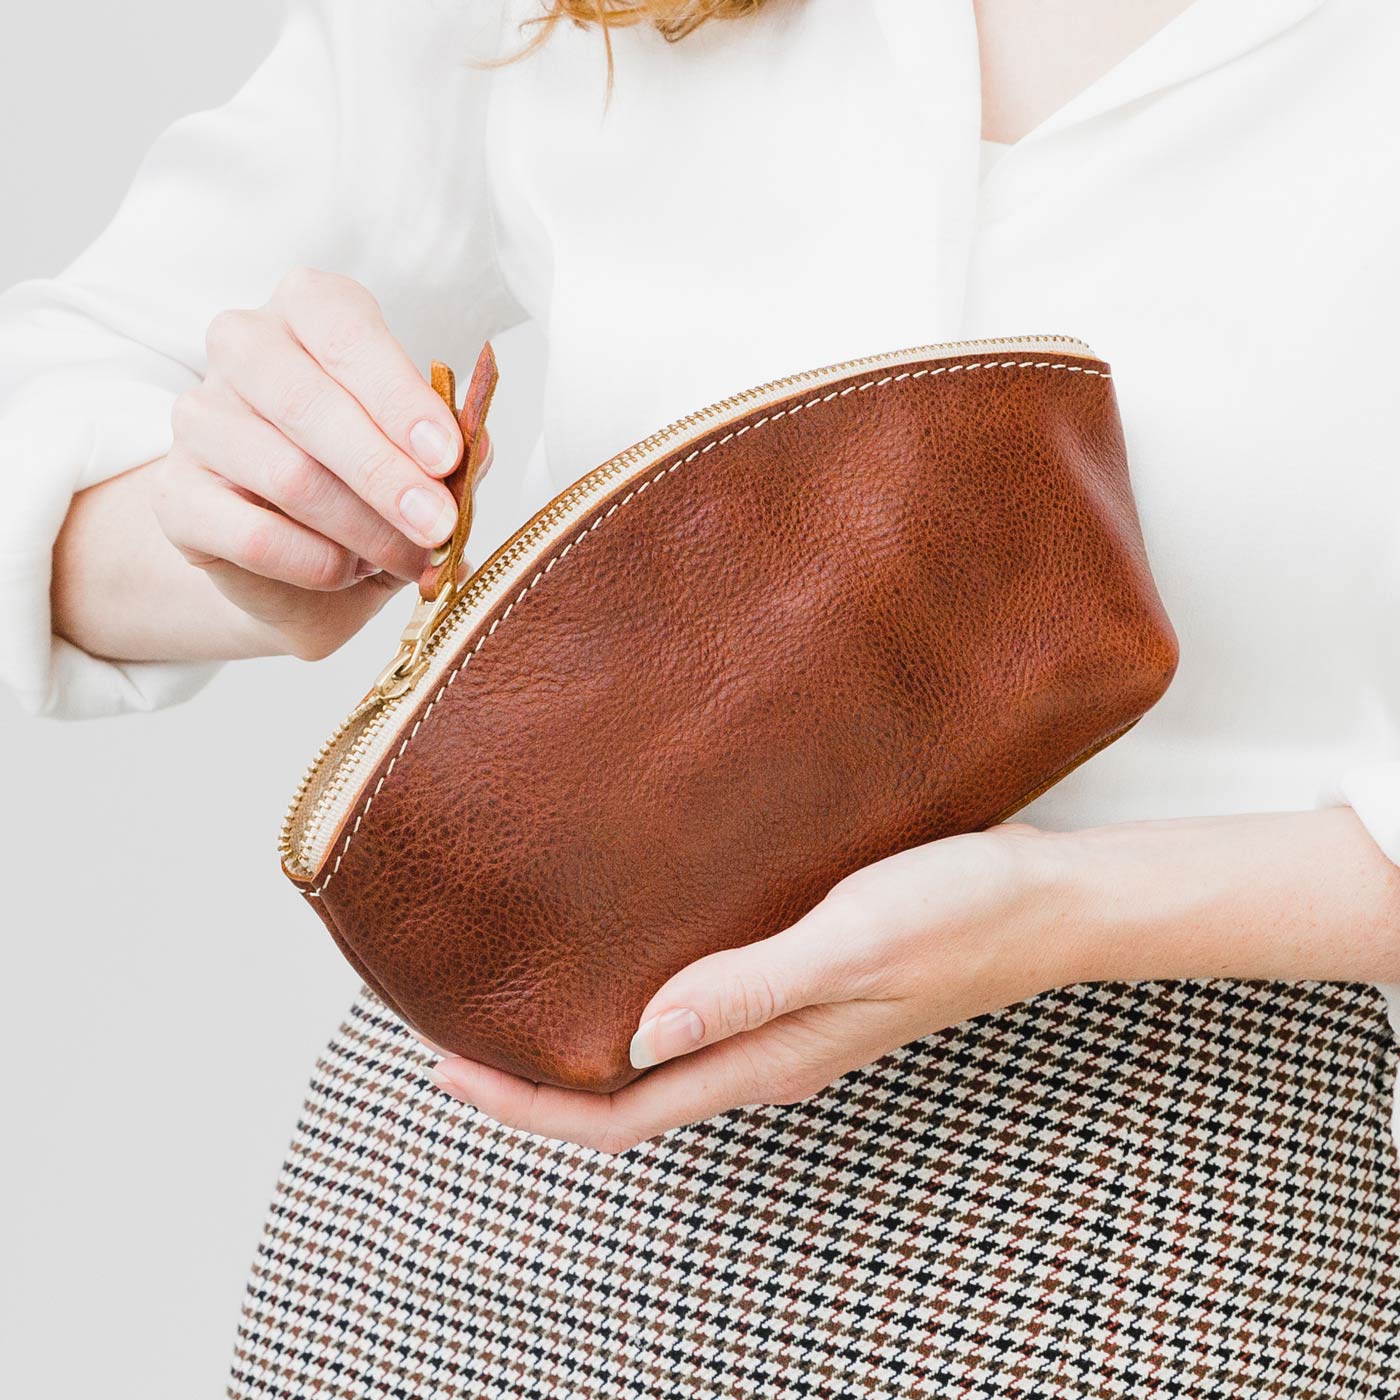 All Color: Nutmeg | Spacious leather makeup bag with curved seams and top zipper